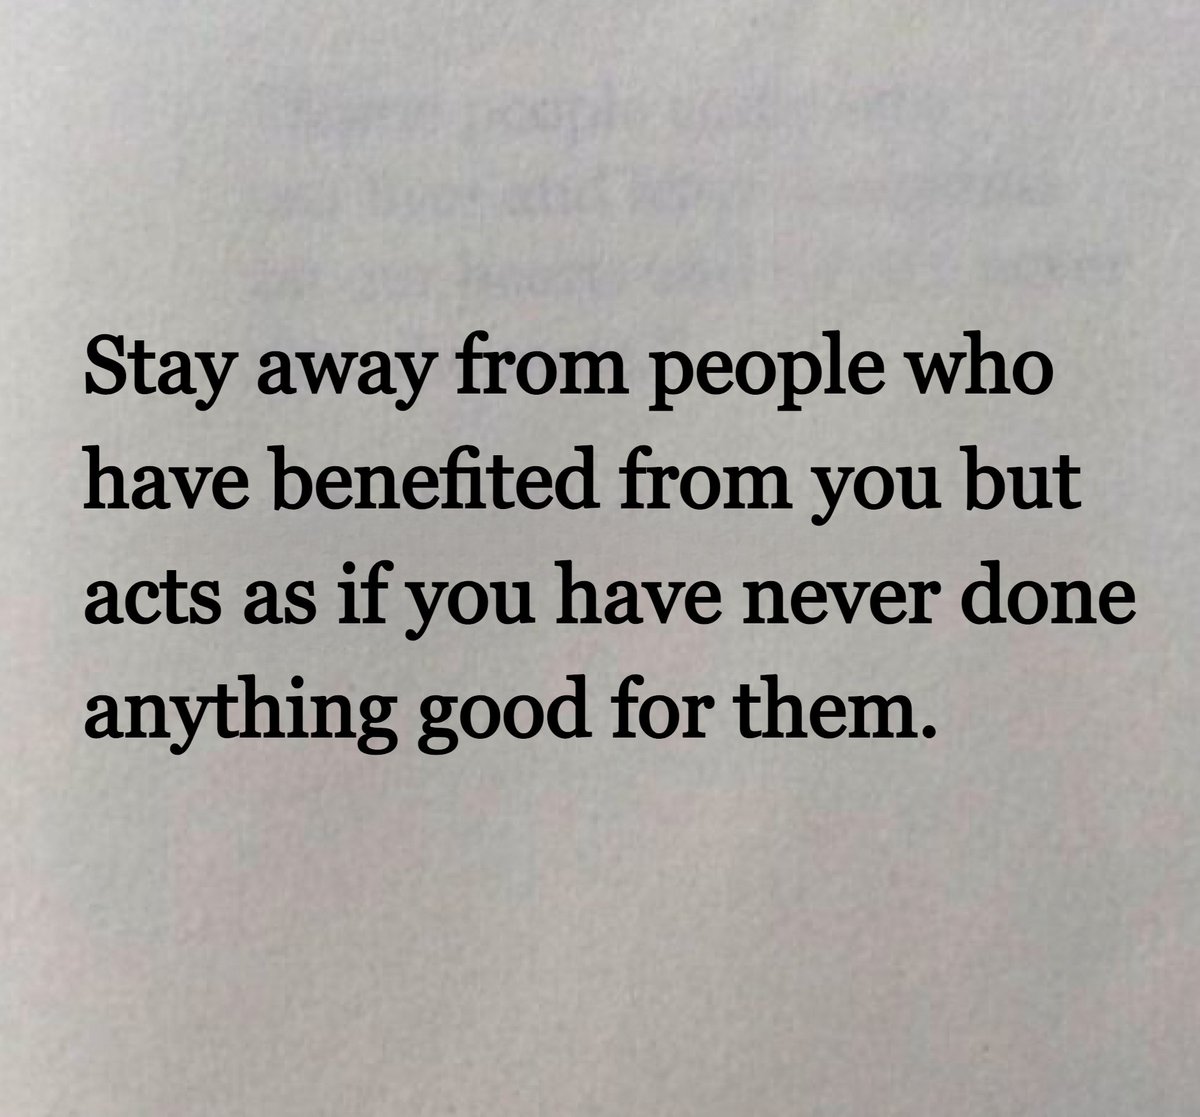 Stay away from toxic people.